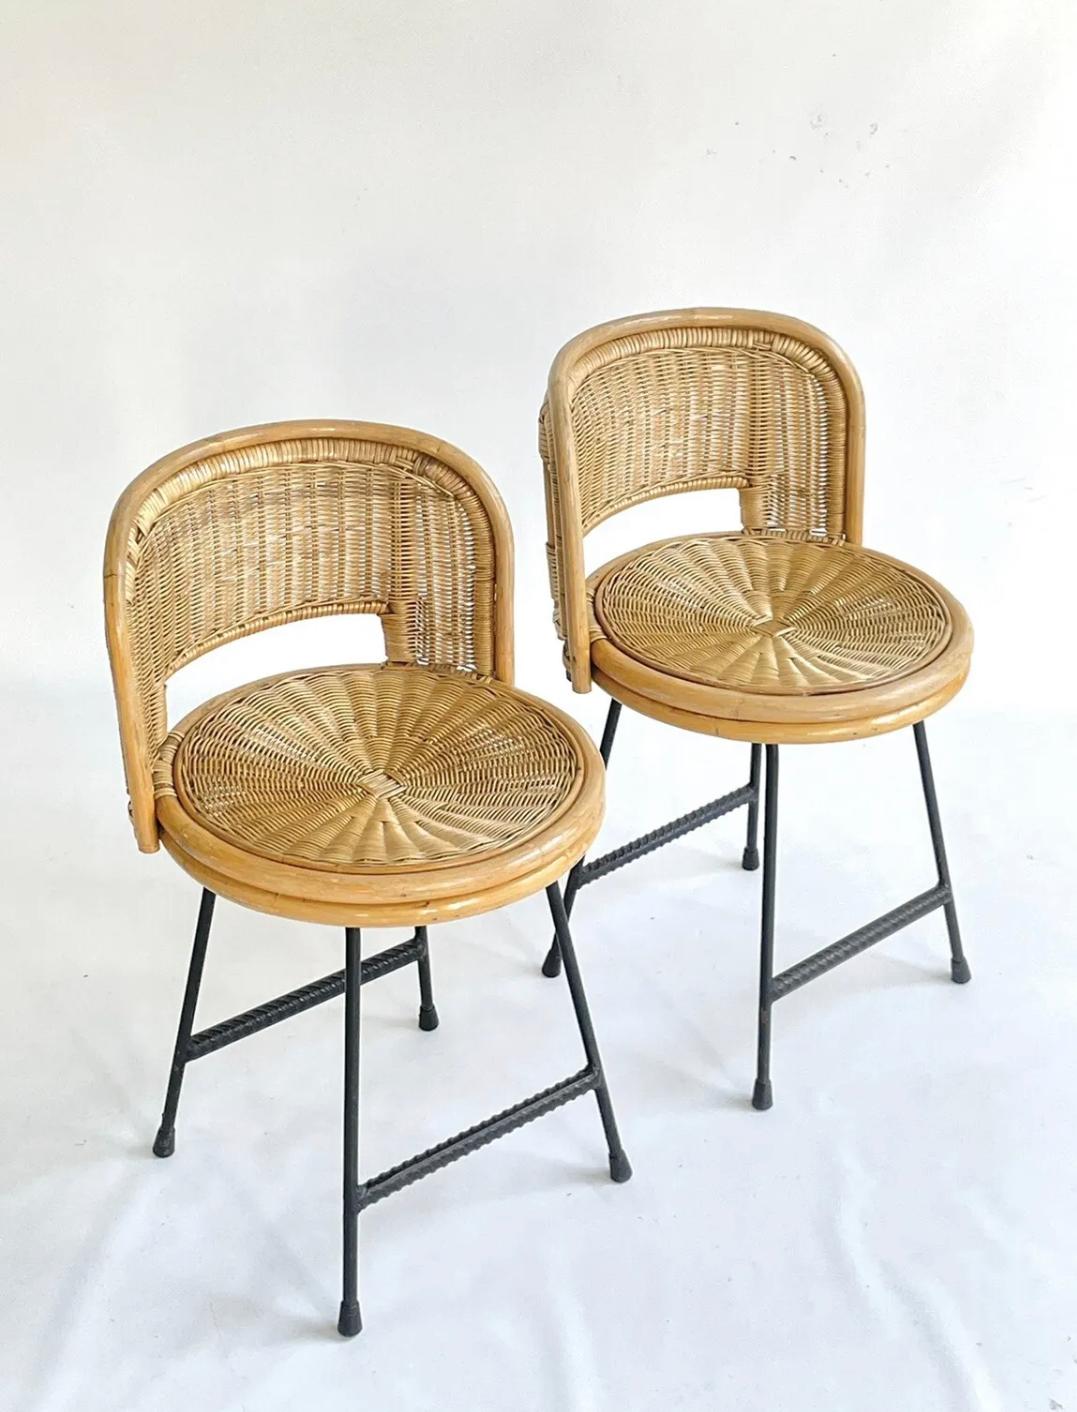 A beautiful pair of mid century wrought iron chairs with a gorgeous bamboo and rattan seat. Fantastic design with circular seats and low backs. Great condition for age.

In the style of Franco Albini 

Seats are 40 cm diameter, 45 cm high. The back